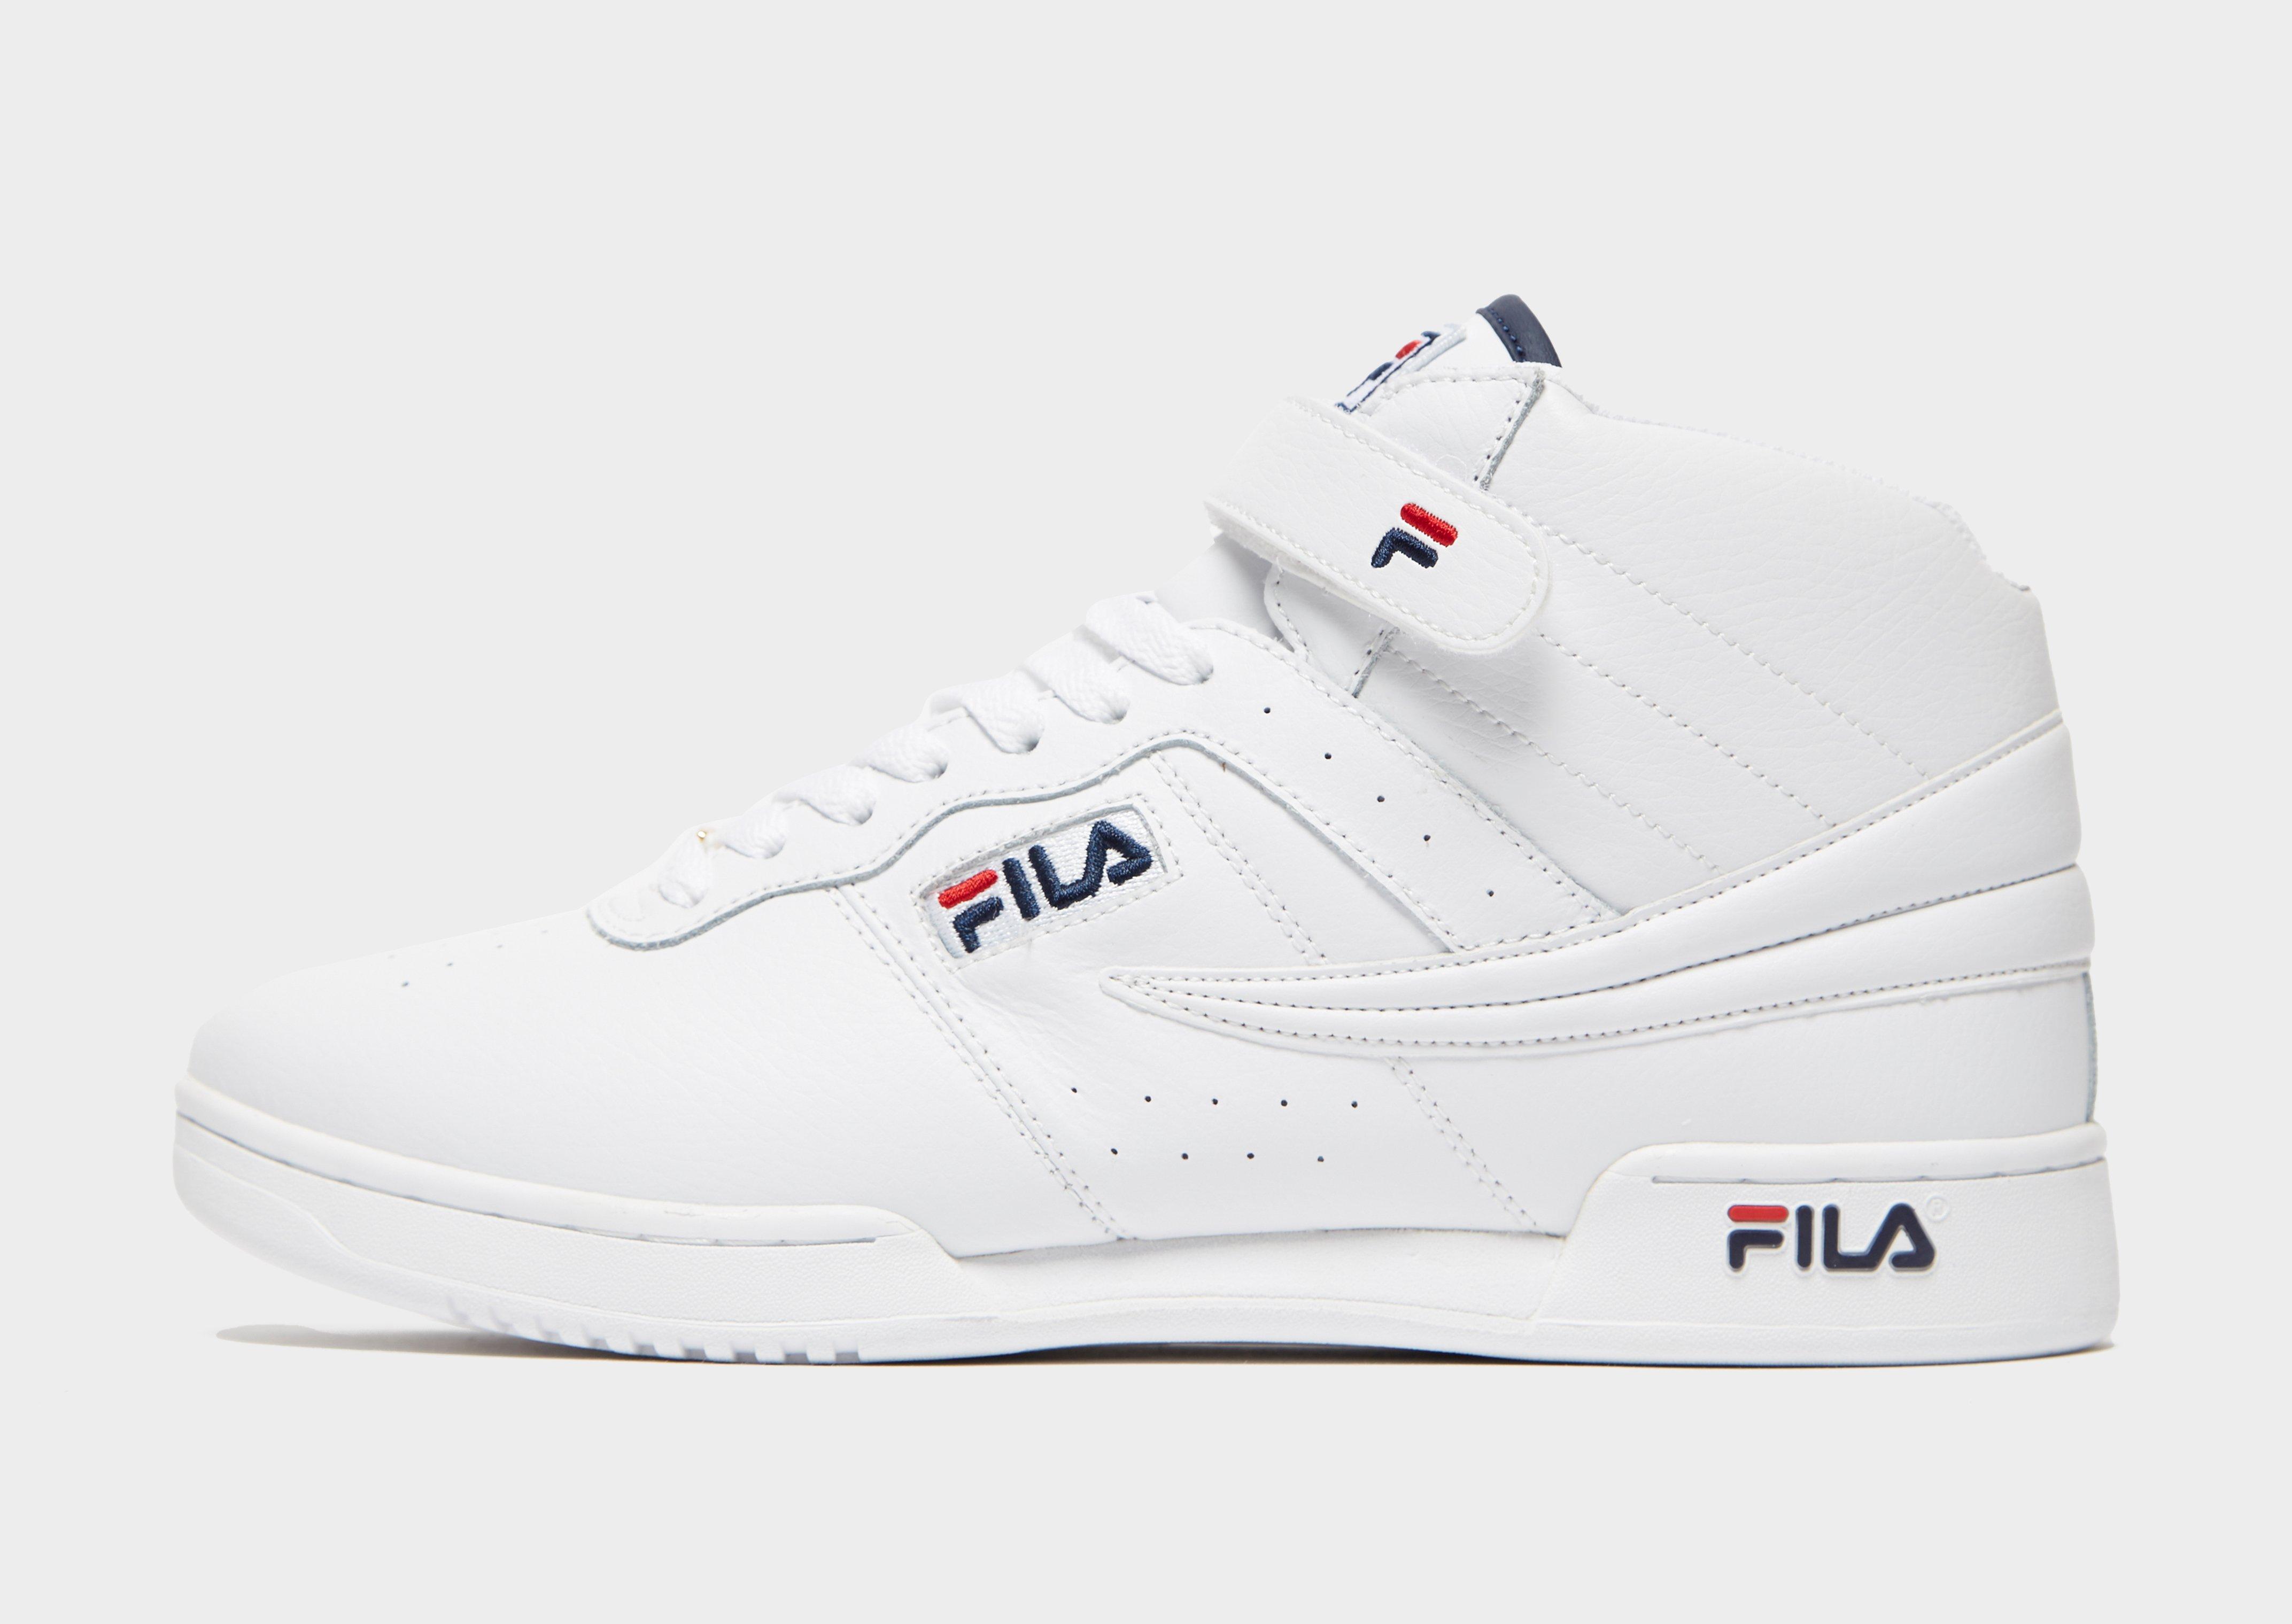 New Fila Men’s F13 Trainers from JD Outlet | eBay